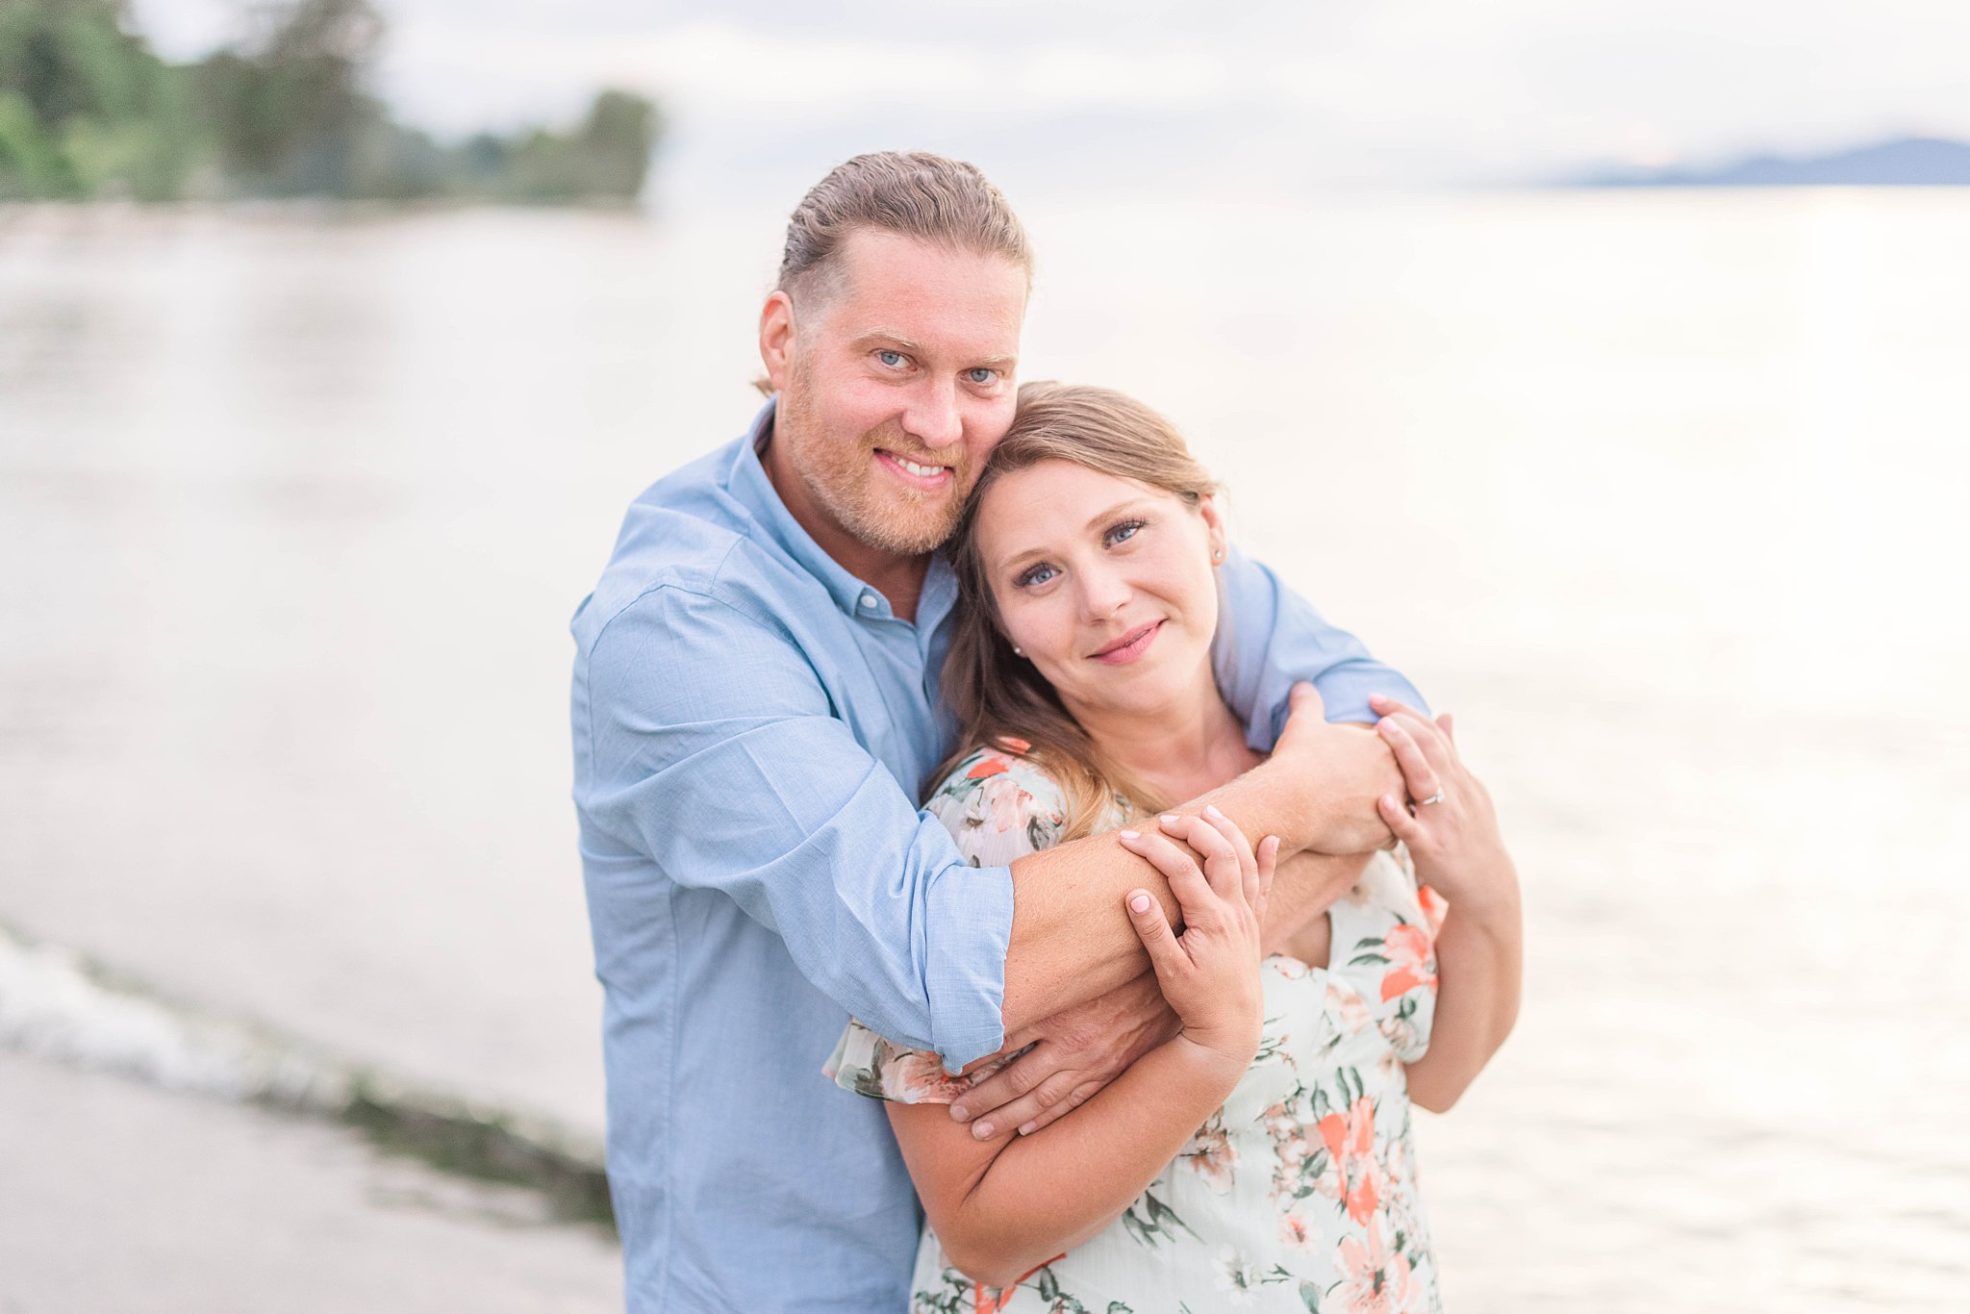 Ethereal Photography Inc kali Birks-gallup airdrie calgary wedding engagement photography